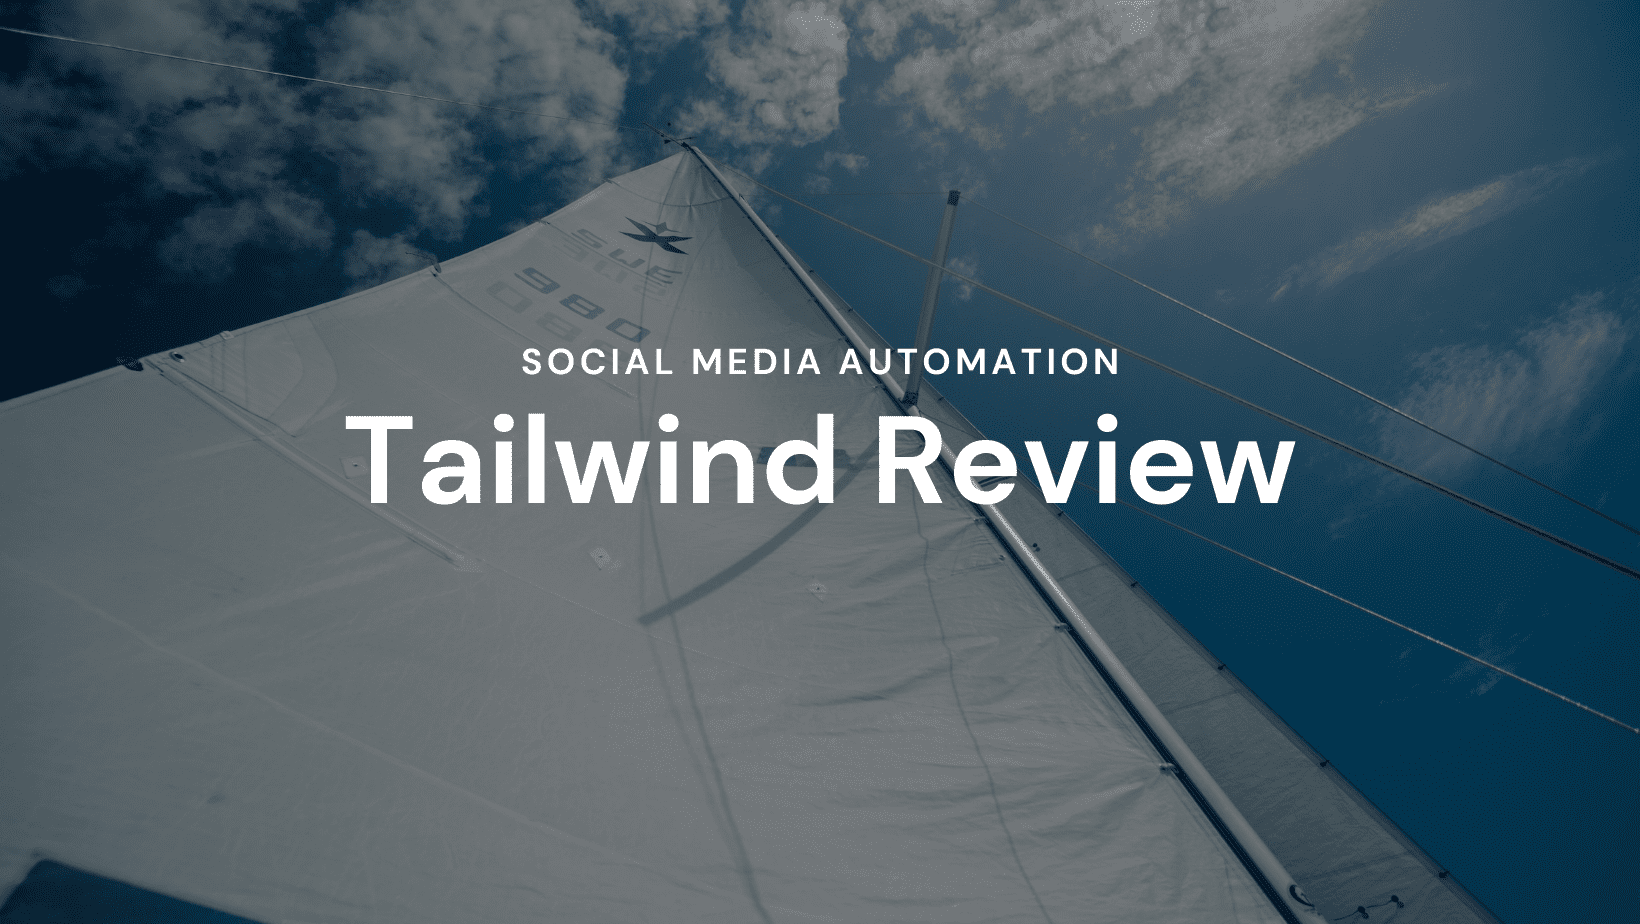 Tailwind Review: Social Media Automation